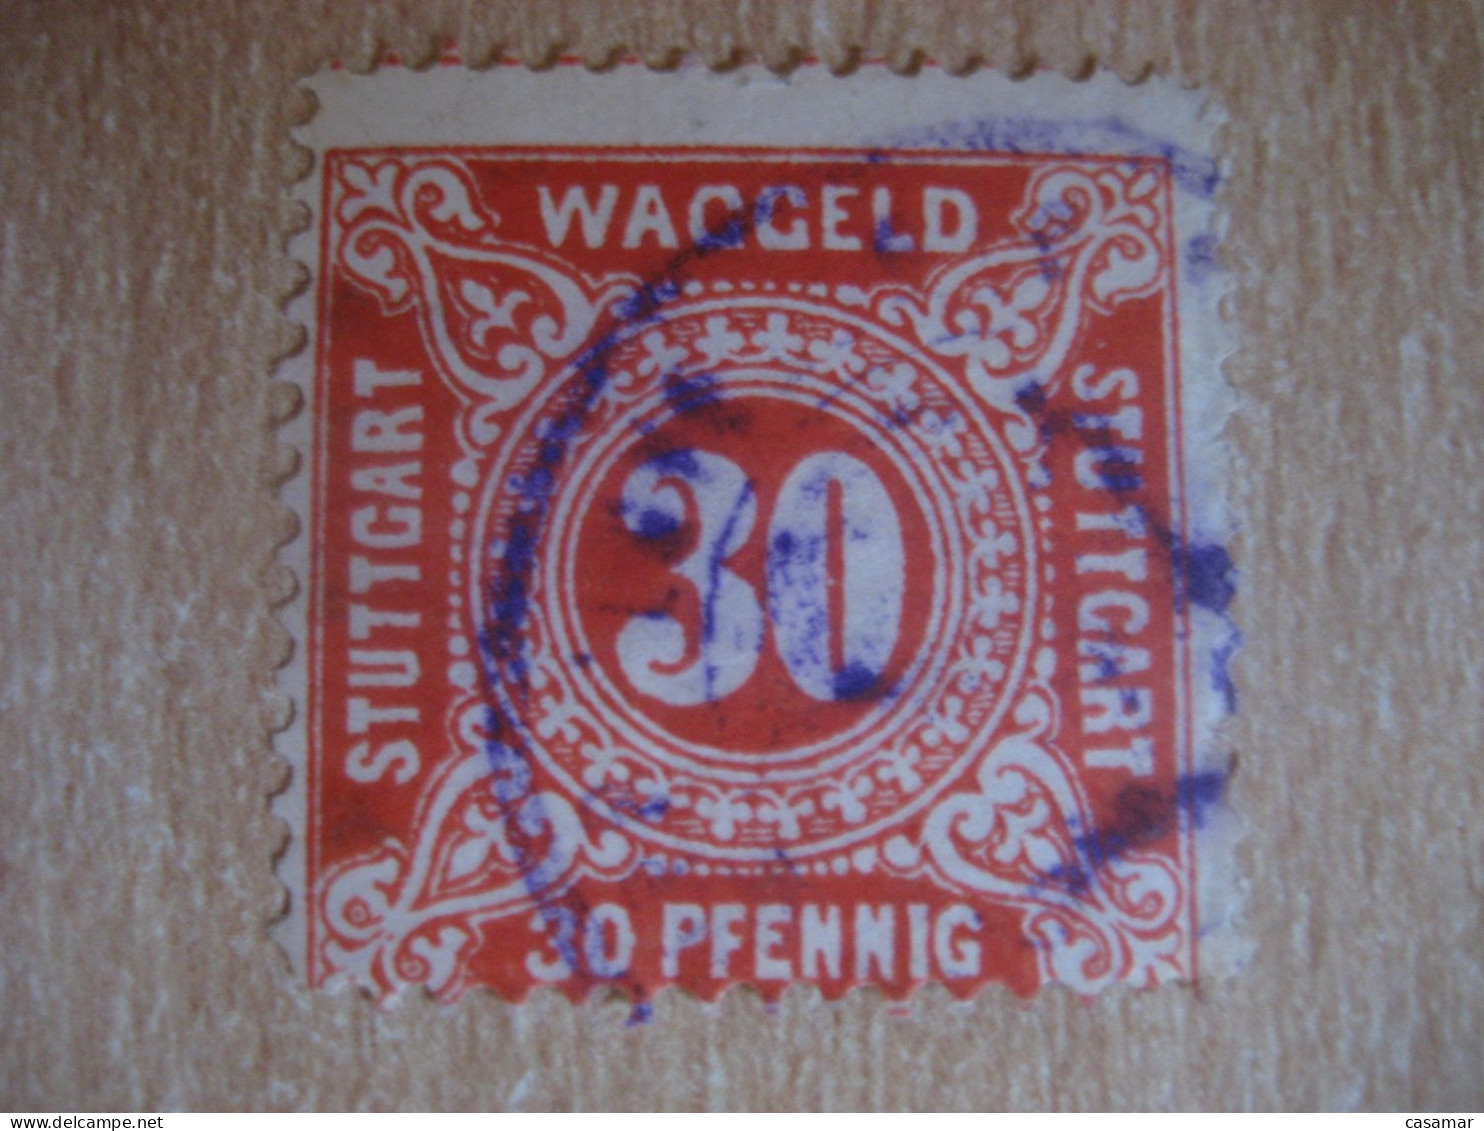 STUTTGART Waggeld 30 Pf Orange Red Local Revenue Fiscal Privat Stamp GERMANY - Postes Privées & Locales